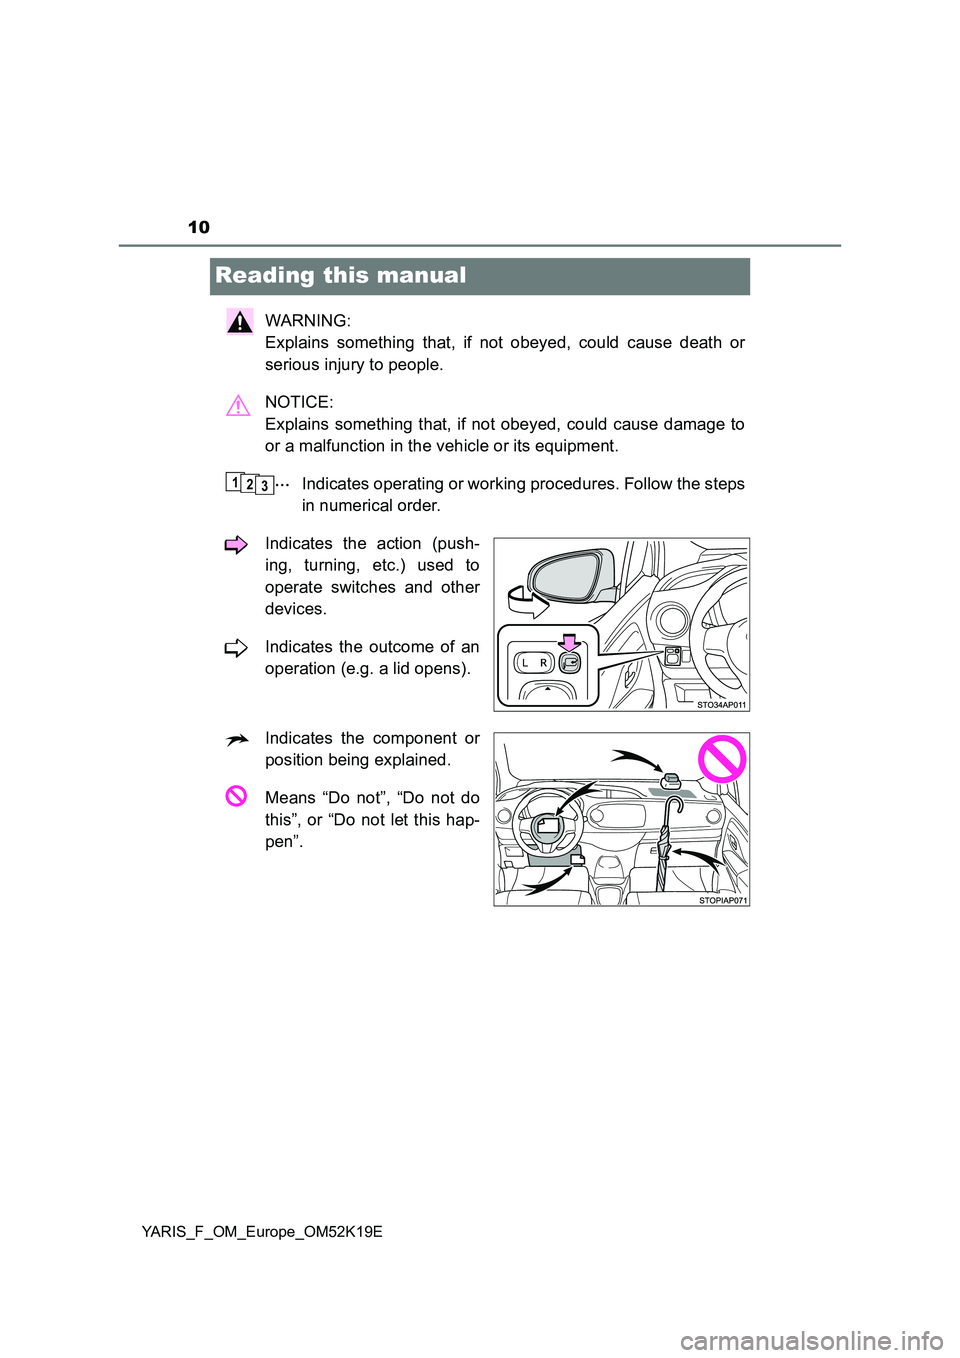 TOYOTA YARIS 2019  Owners Manual 10
YARIS_F_OM_Europe_OM52K19E
Reading this manual
WARNING:  
Explains something that, if not obeyed, could cause death or 
serious injury to people. 
NOTICE:  
Explains something that, if not obeyed, 